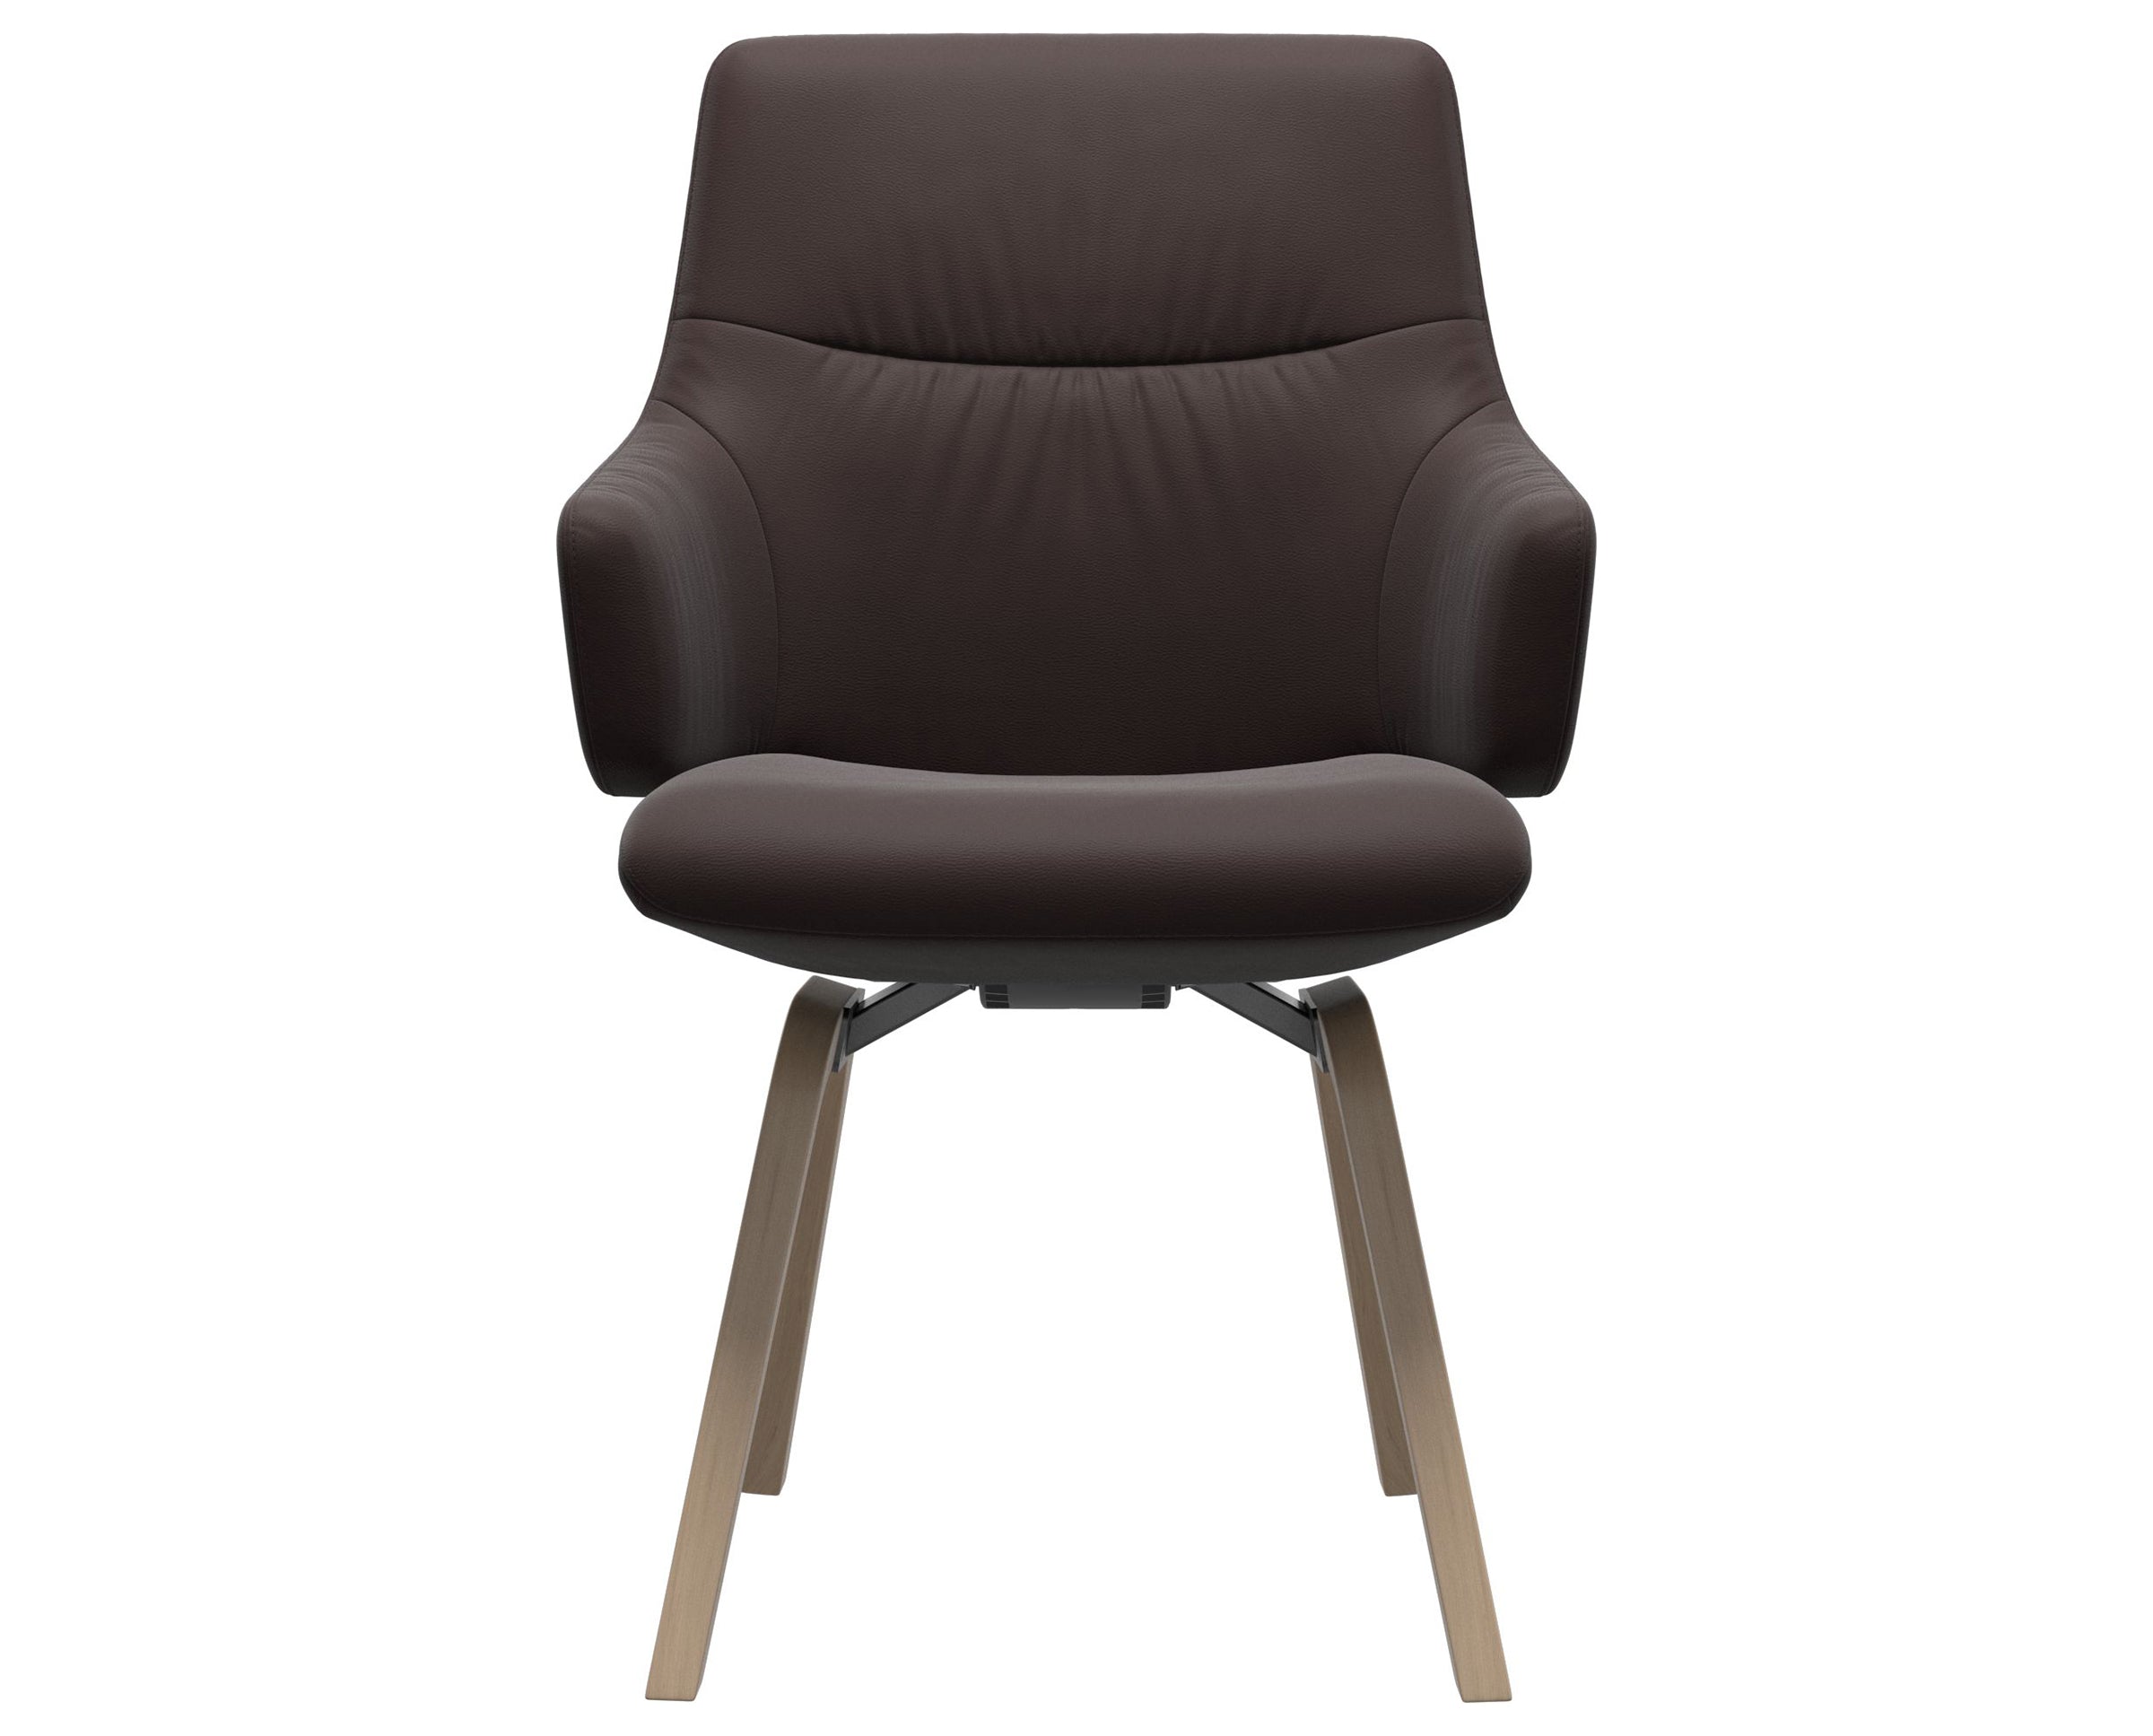 Paloma Leather Chocolate and Natural Base | Stressless Mint Low Back D200 Dining Chair w/Arms | Valley Ridge Furniture